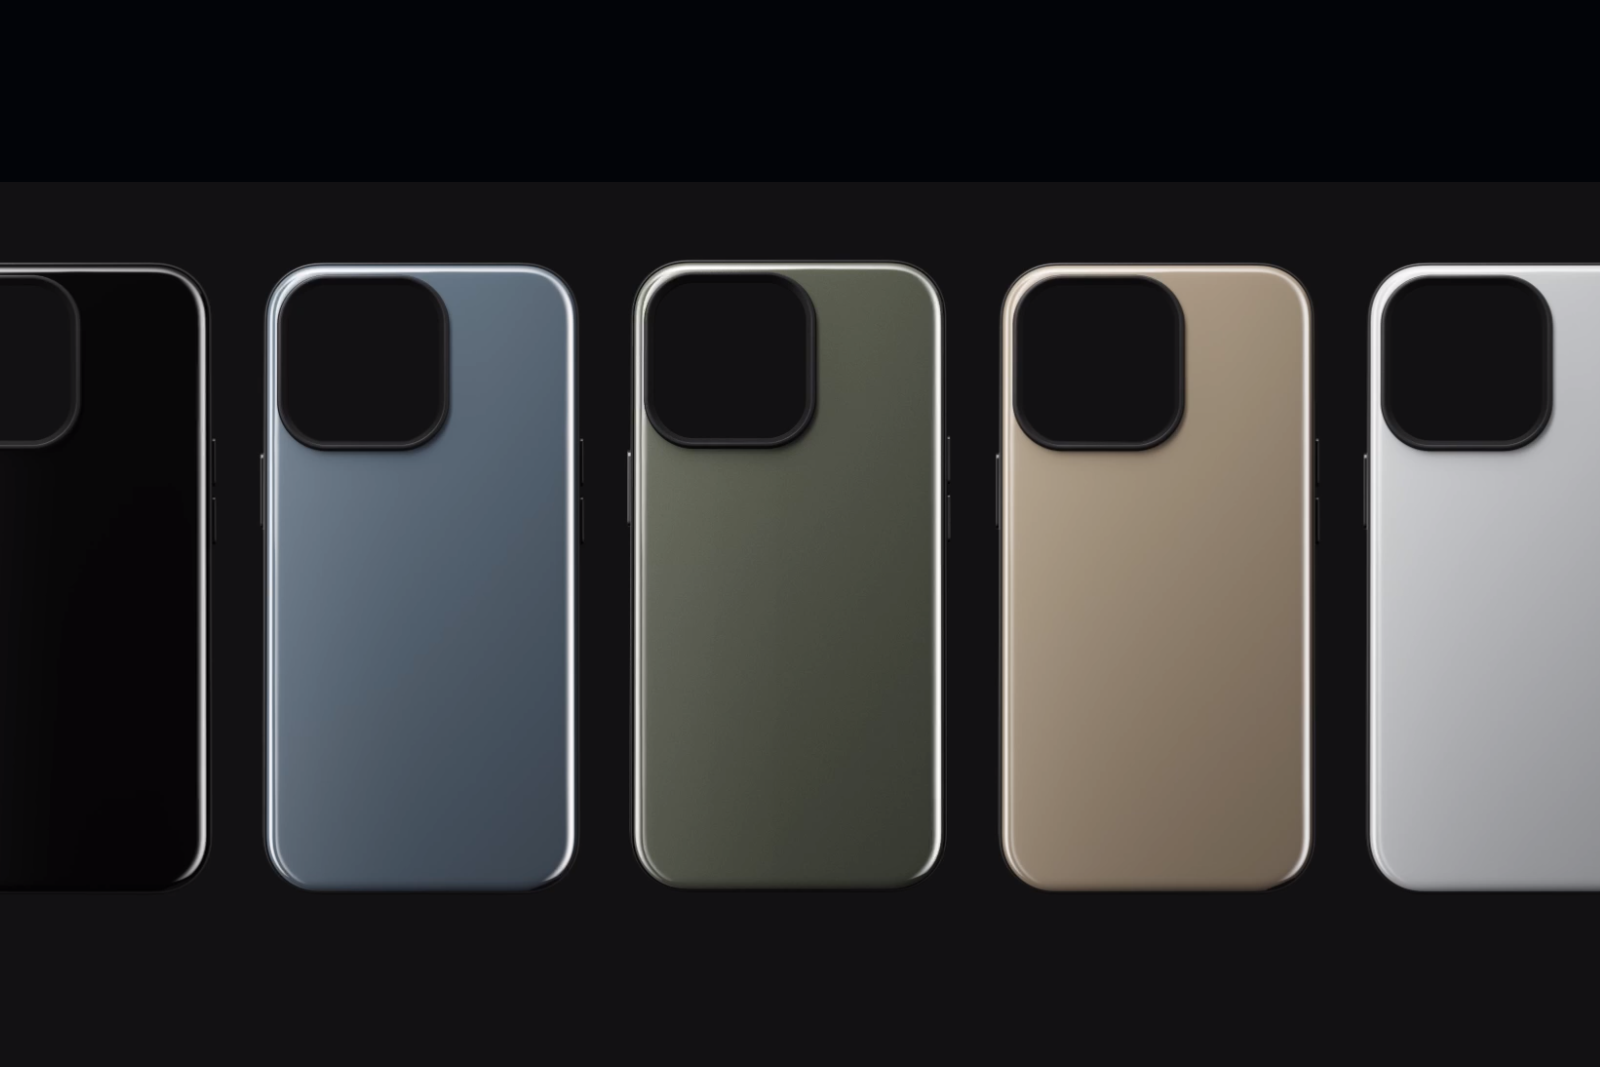 Nomad Sport Case for iPhone 13 - Nomad&#039;s new iPhone 13 cases are fitted with an NFC chip